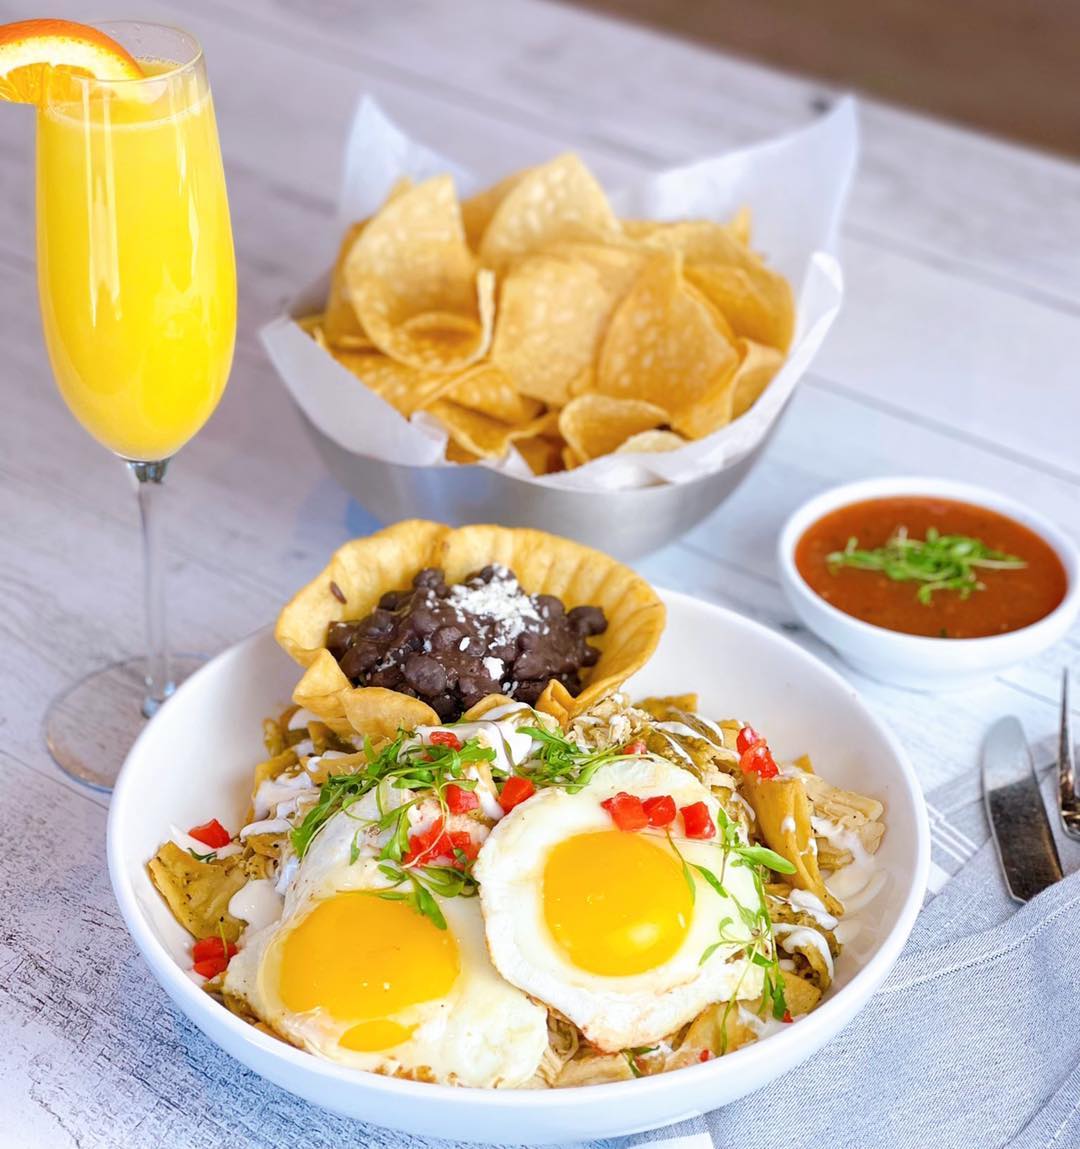 Weekend Brunch Mezcal Mexican Grill | Mezcal Mexican Grill Events and Entertainment